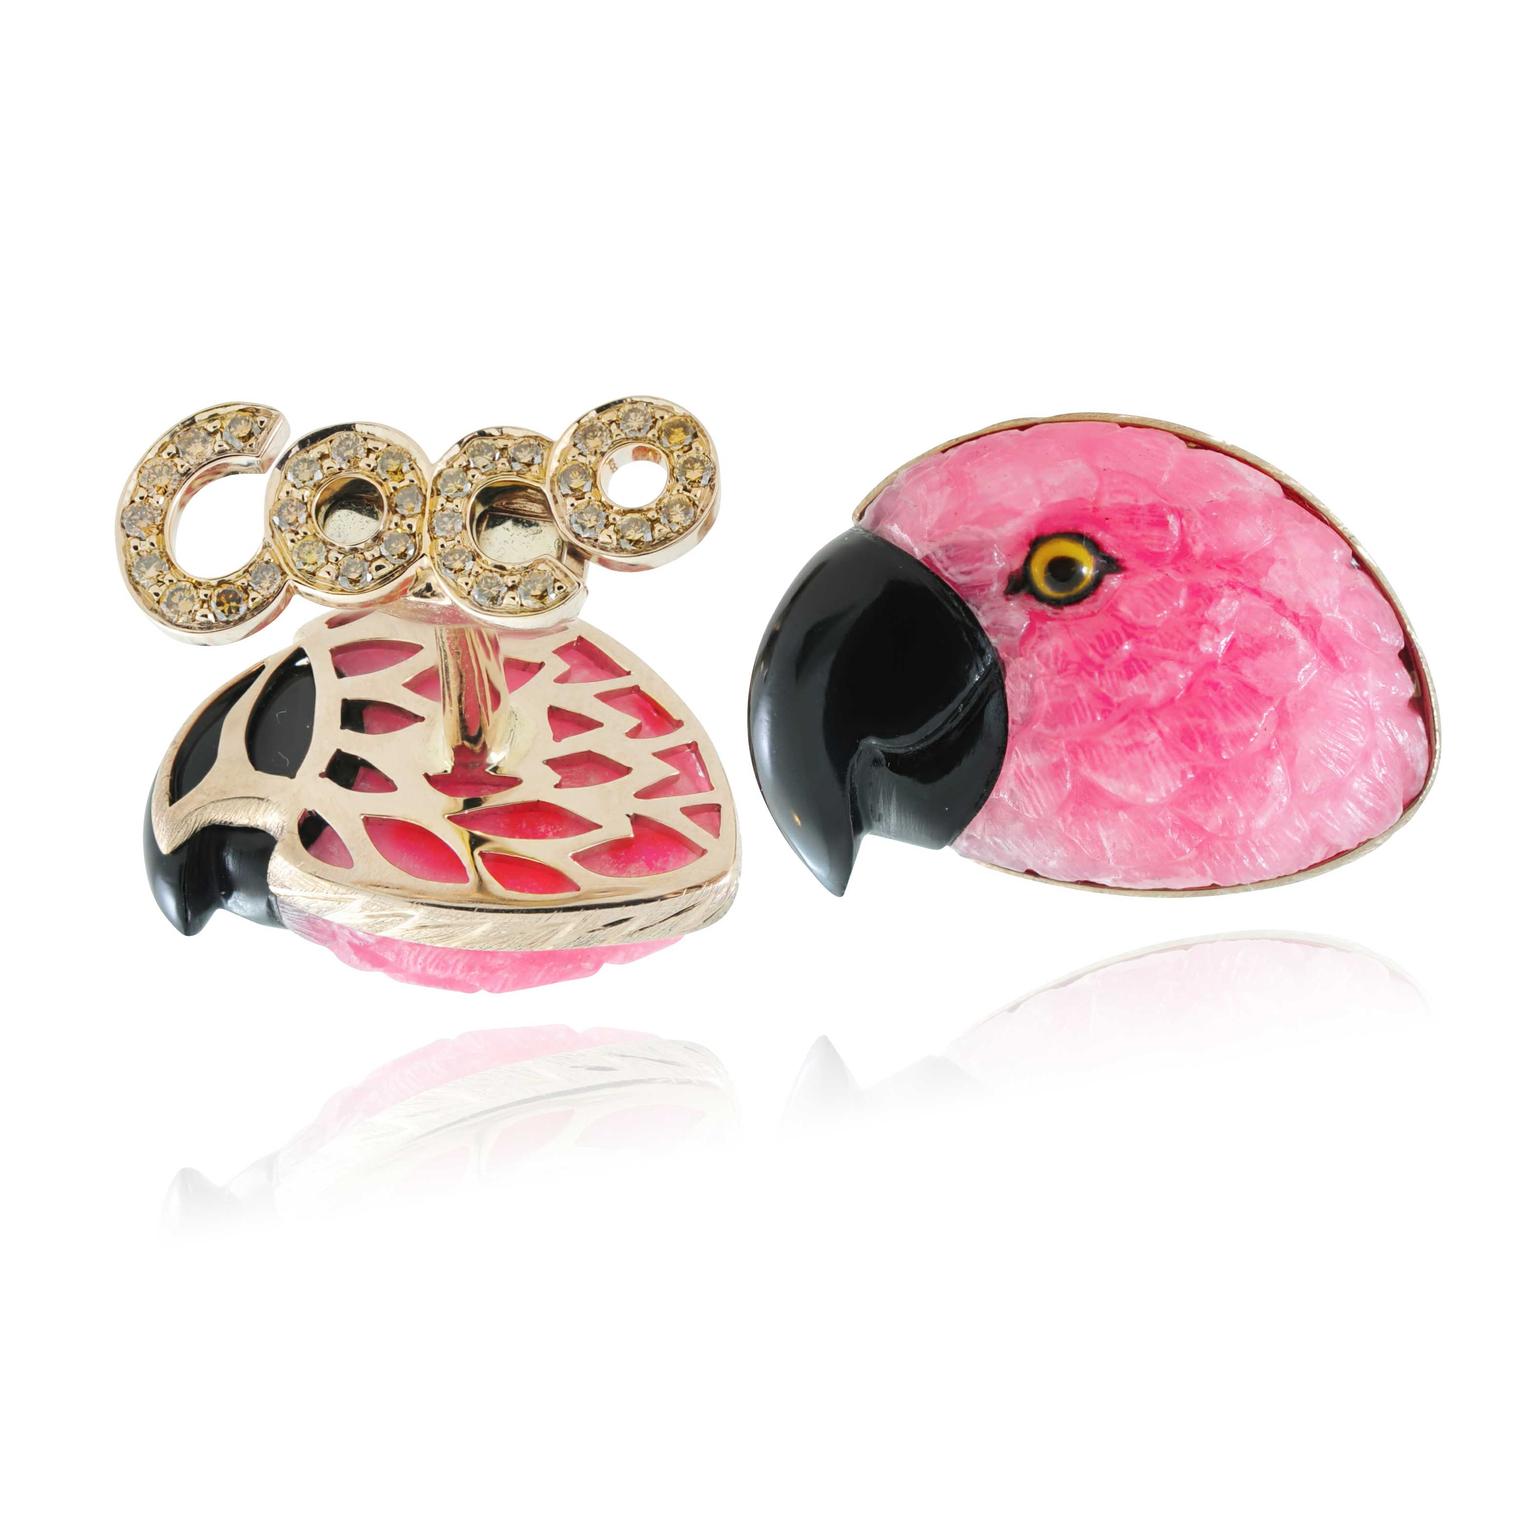 Coco Parrot cufflinks by Lydia Courteille